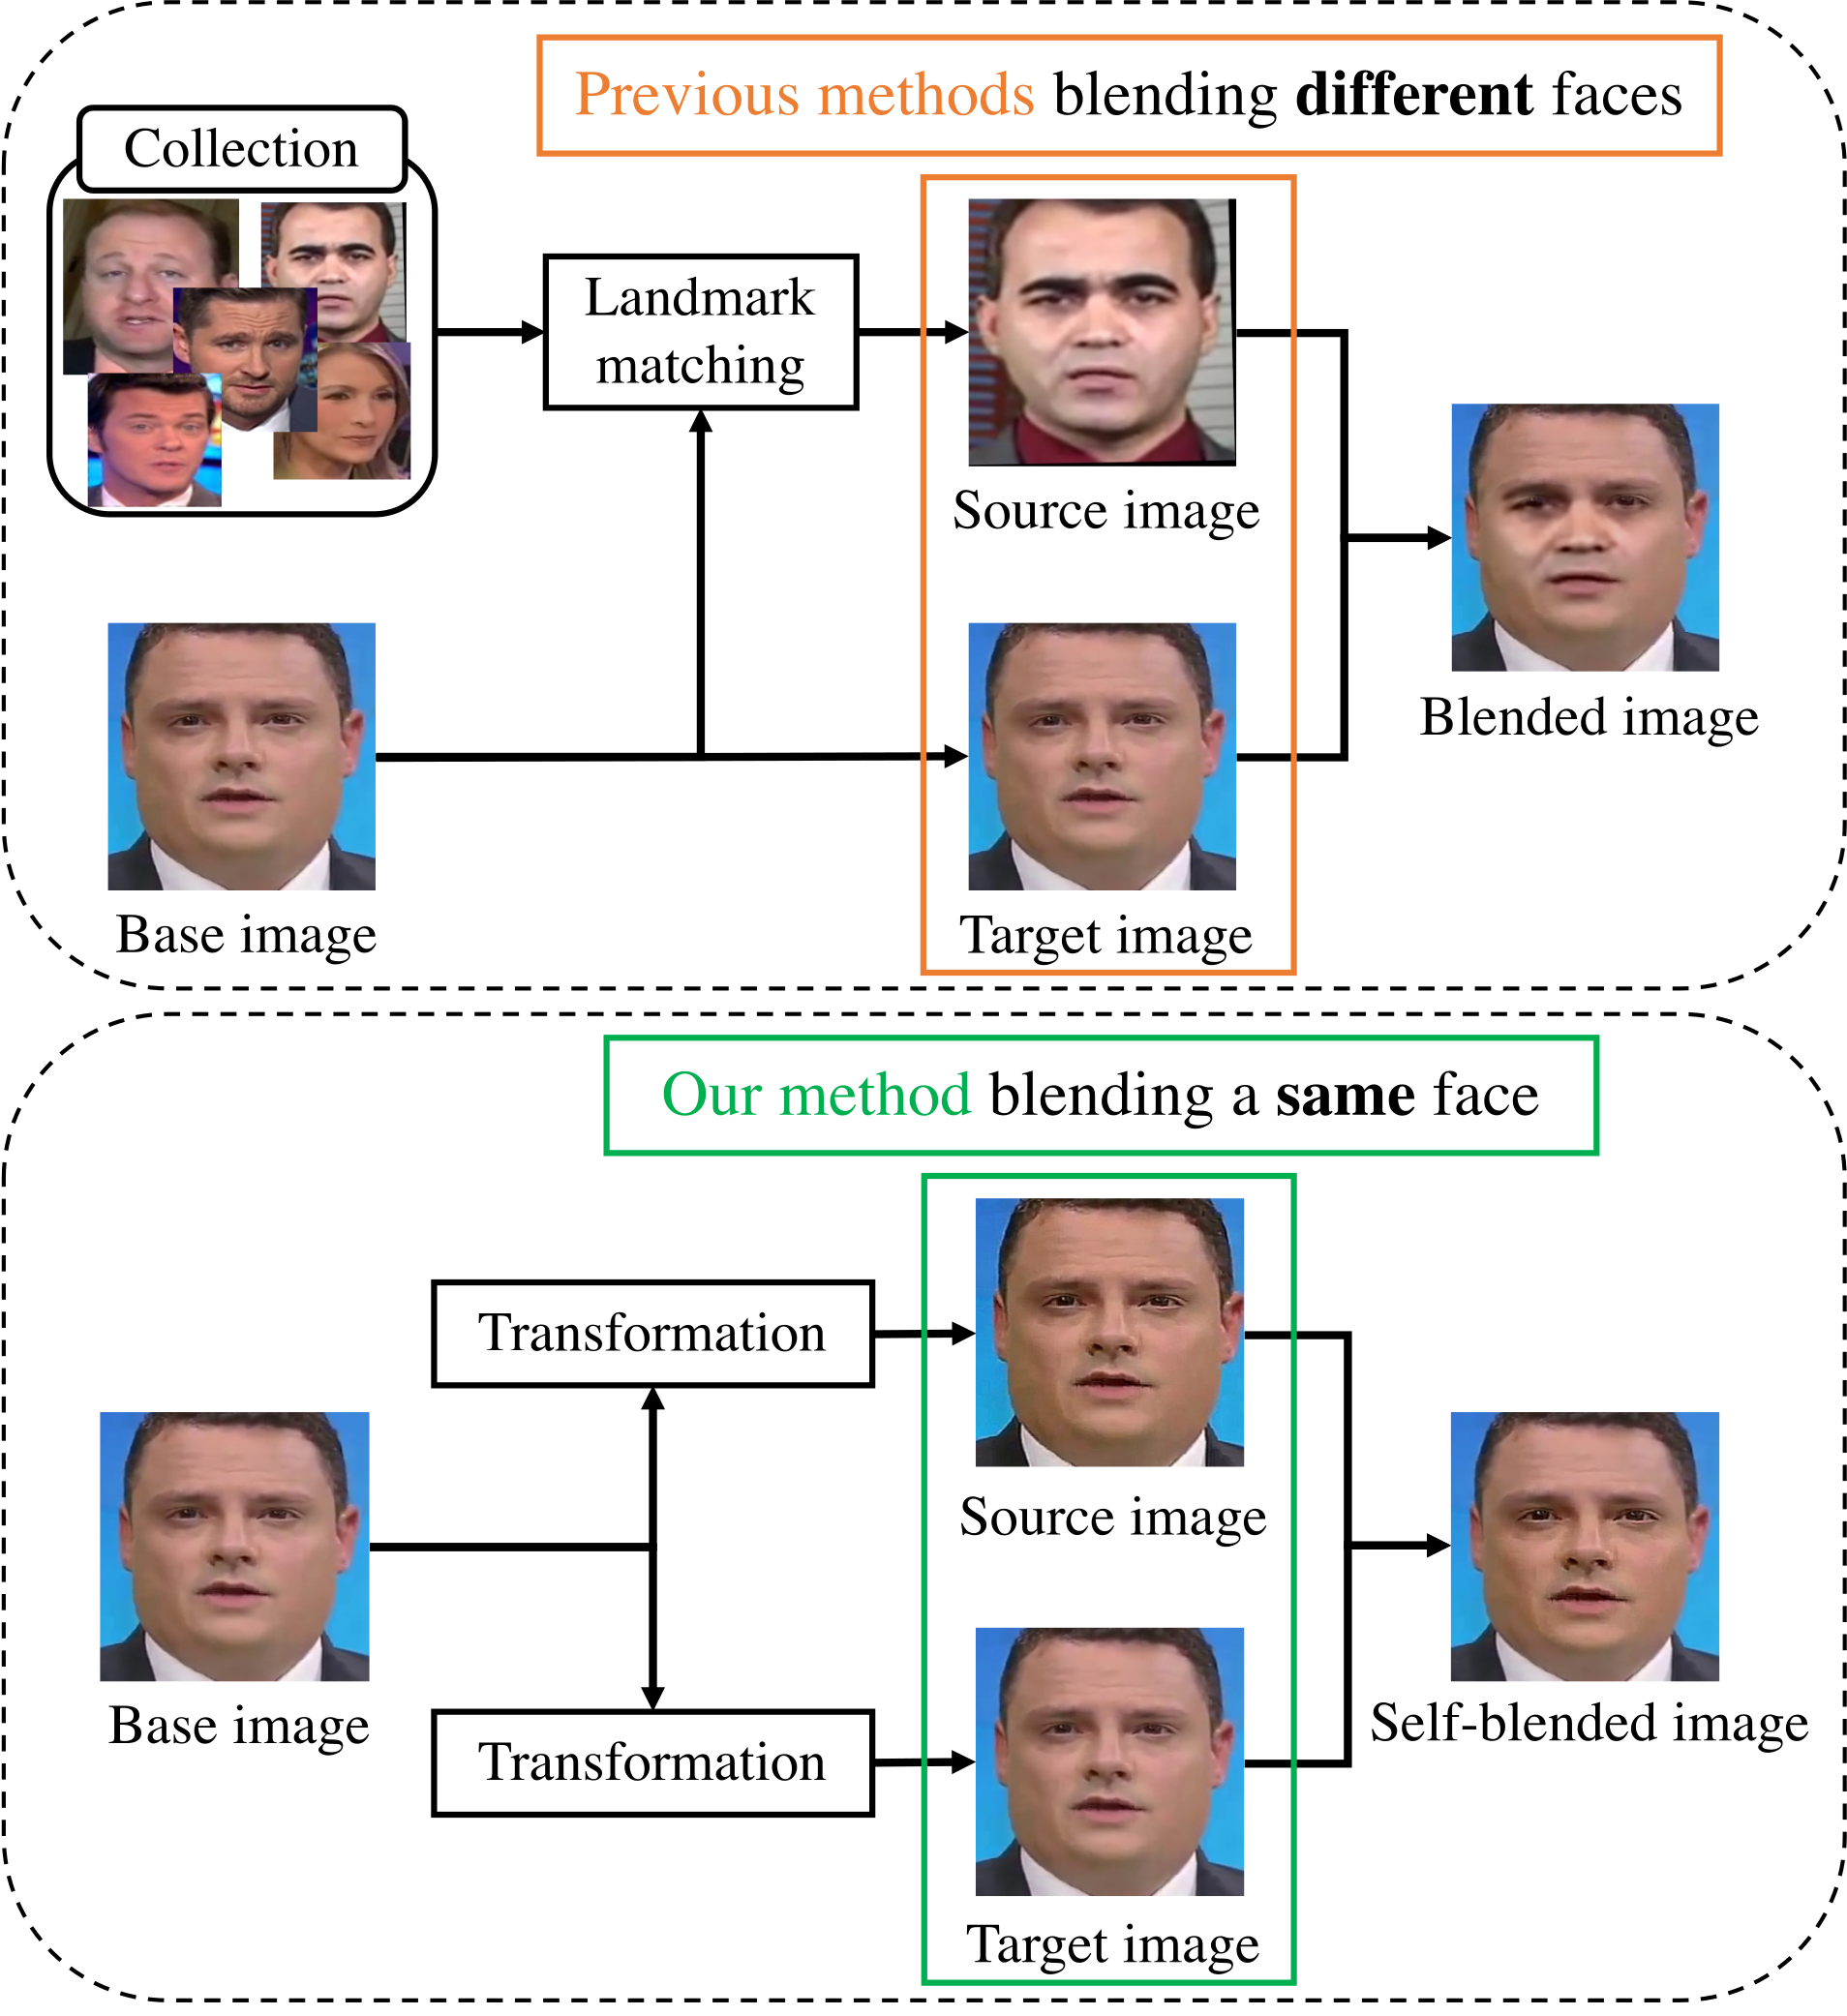 A flowchart with different faces as the nodes